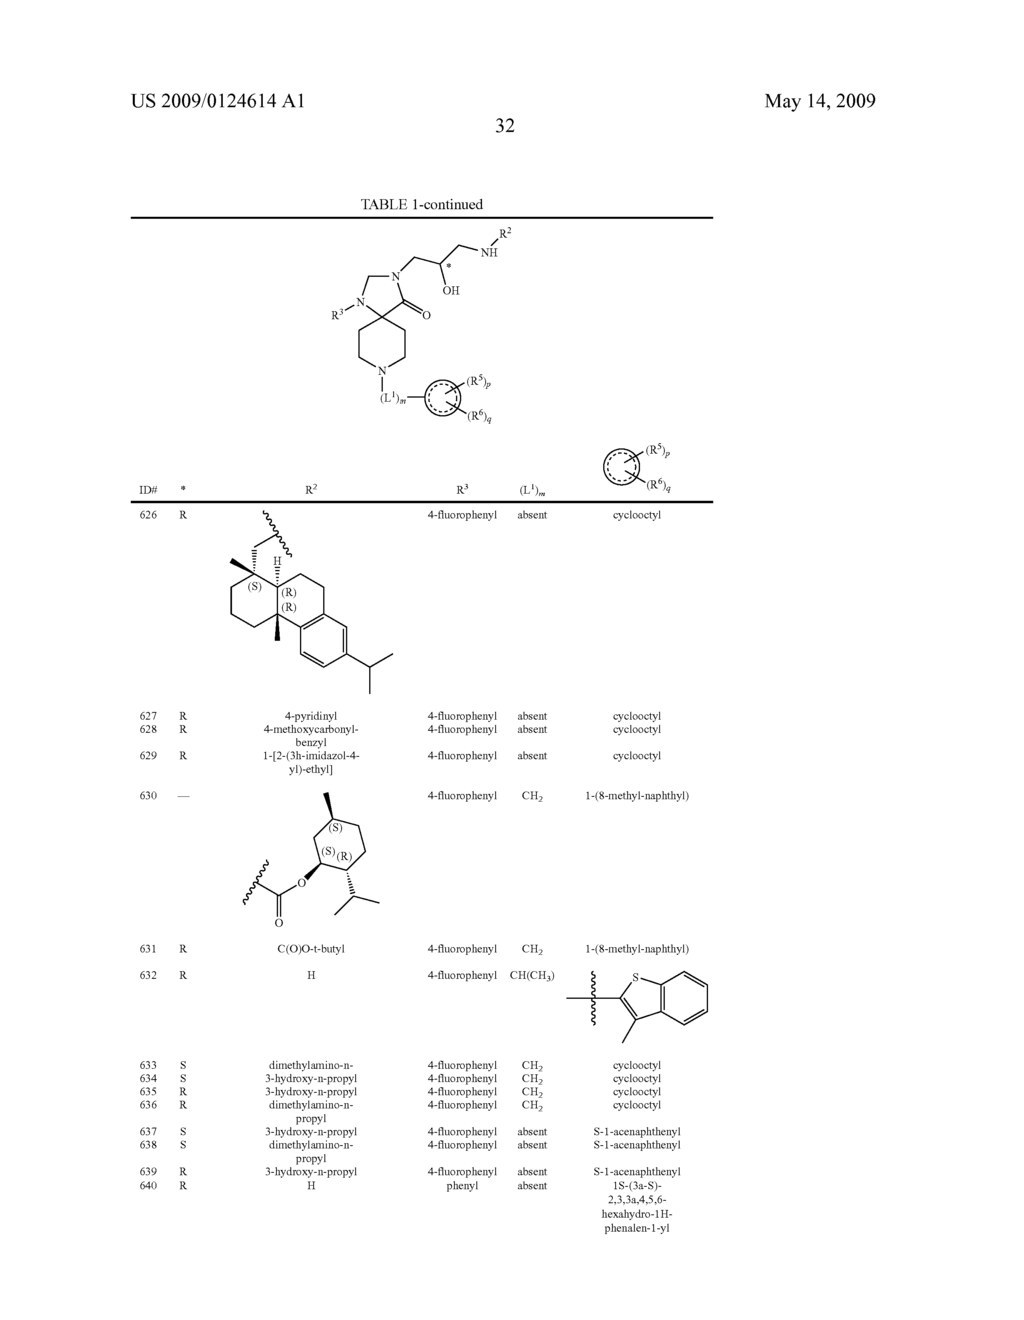 HYDROXY ALKYL SUBSTITUTED 1,3,8-TRIAZASPIRO[4.5]DECAN-4-ONE DERIVATIVES USEFUL FOR THE TREATMENT OF ORL-1 RECEPTOR MEDIATED DISORDERS - diagram, schematic, and image 33